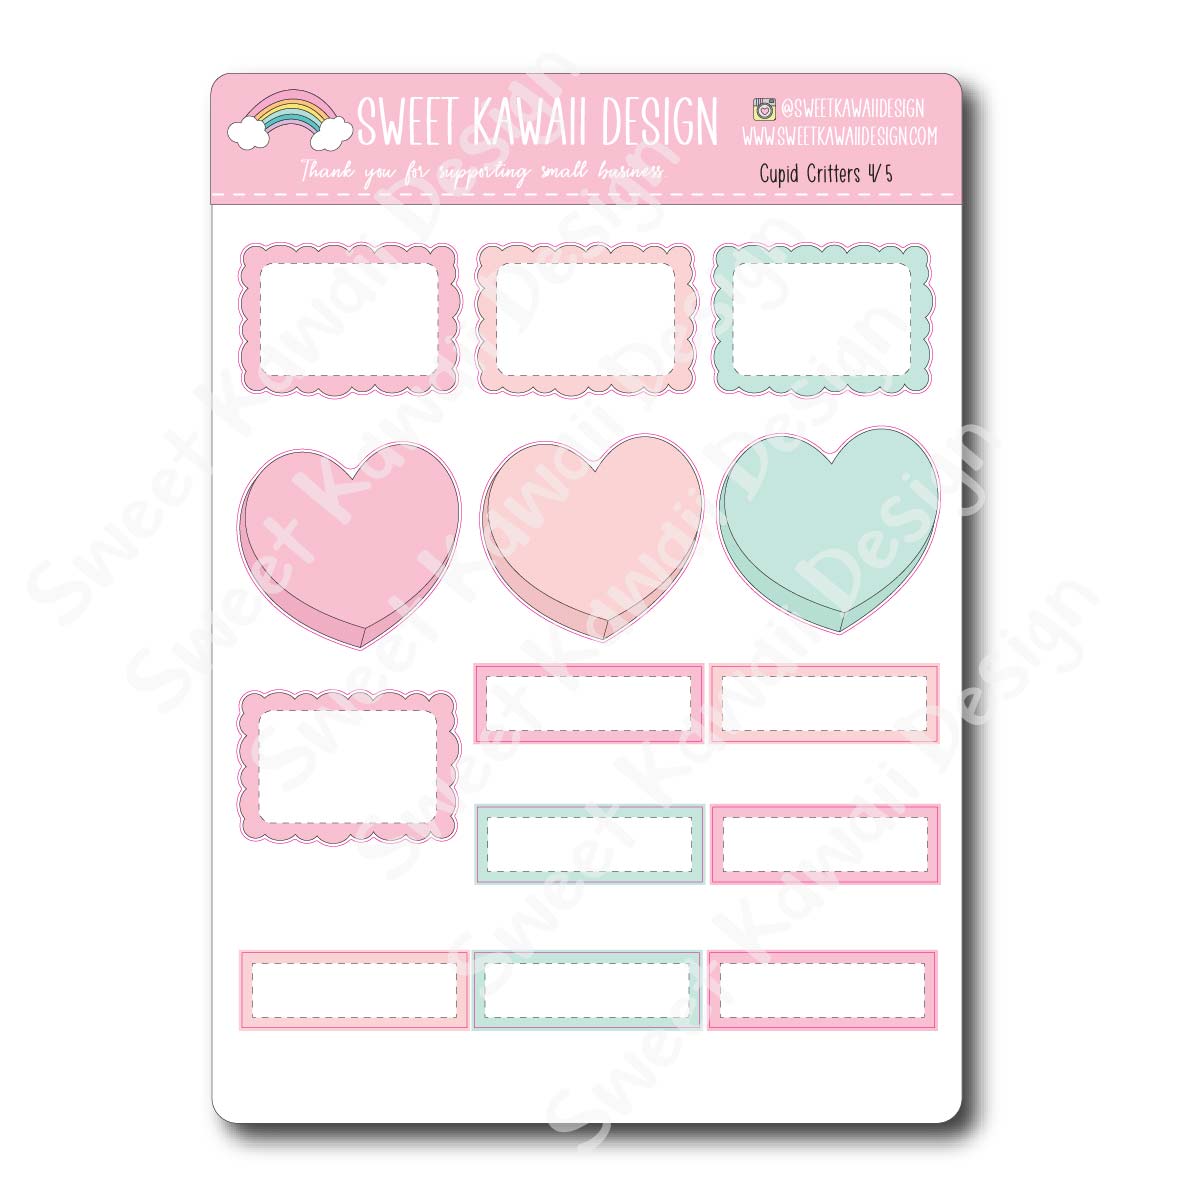 Weekly Kit - Cupid Critters - SIZE OPTIONS AVAILABLE